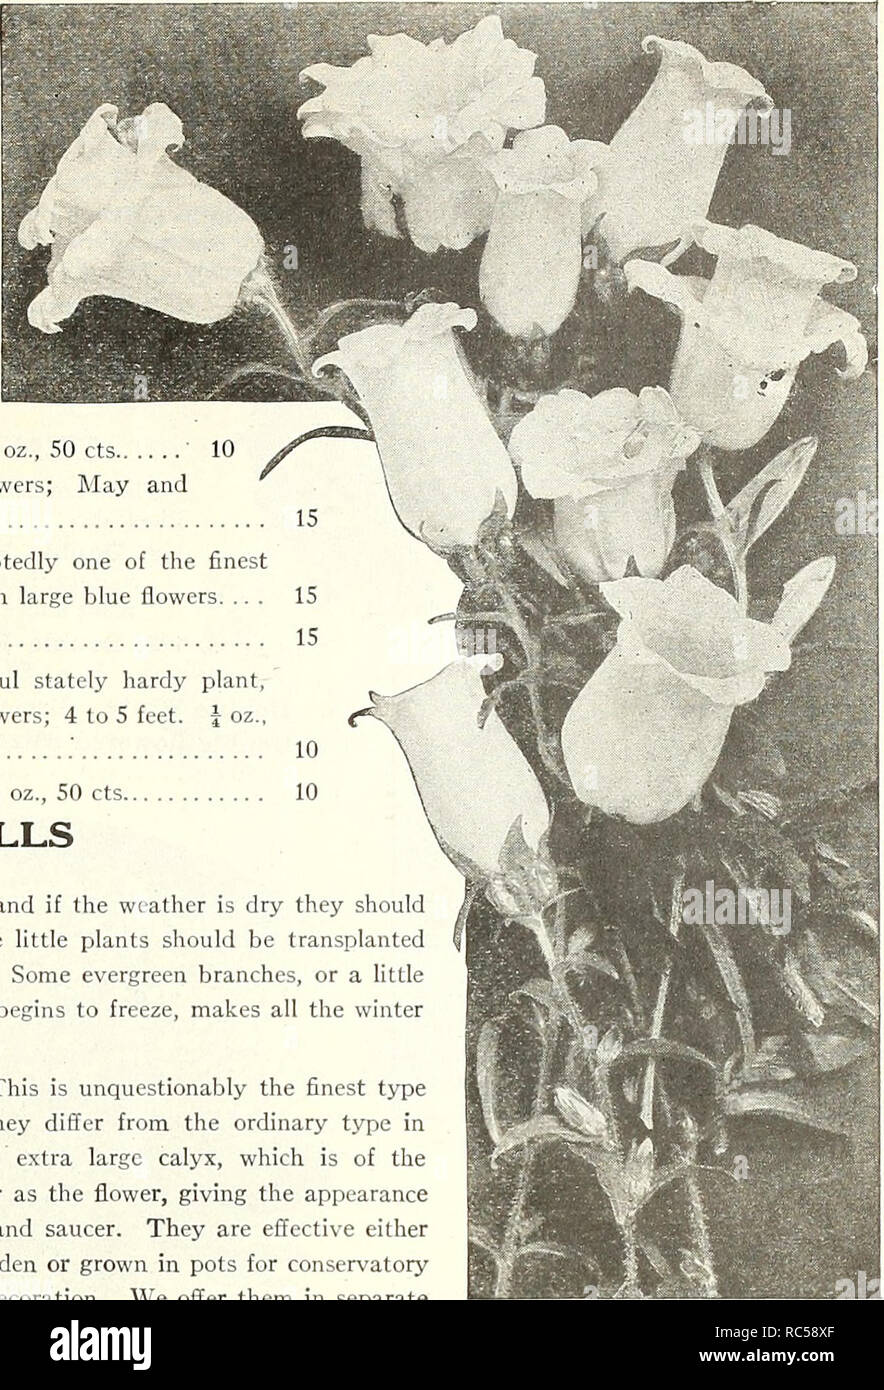 . Dreer's mid-summer list 1922. Flowers Seeds Catalogs; Vegetables Seeds Catalogs; Nurseries (Horticulture) Catalogs; Gardening Equipment and supplies Catalogs. Cup and Saucer and Single Canterbury Bells Campanula Pyramidalis PER PKT 17.^6 Rose Pink. Delicate rosy-pink 15 173^ Blue. A fine clear shade 15 1738 White. Pure white 15 1740 Finest Mixed. J oz., 75 cts lo 1734 Double-flowering Cup and Saucer. A new race from a celebrated French hybridizer; contains all colors 25 Medium {.Single Canter- bury Bells). The old-fashioned sort with beautiful, large bell-shaped blossoms. We ofl'er four dist Stock Photo